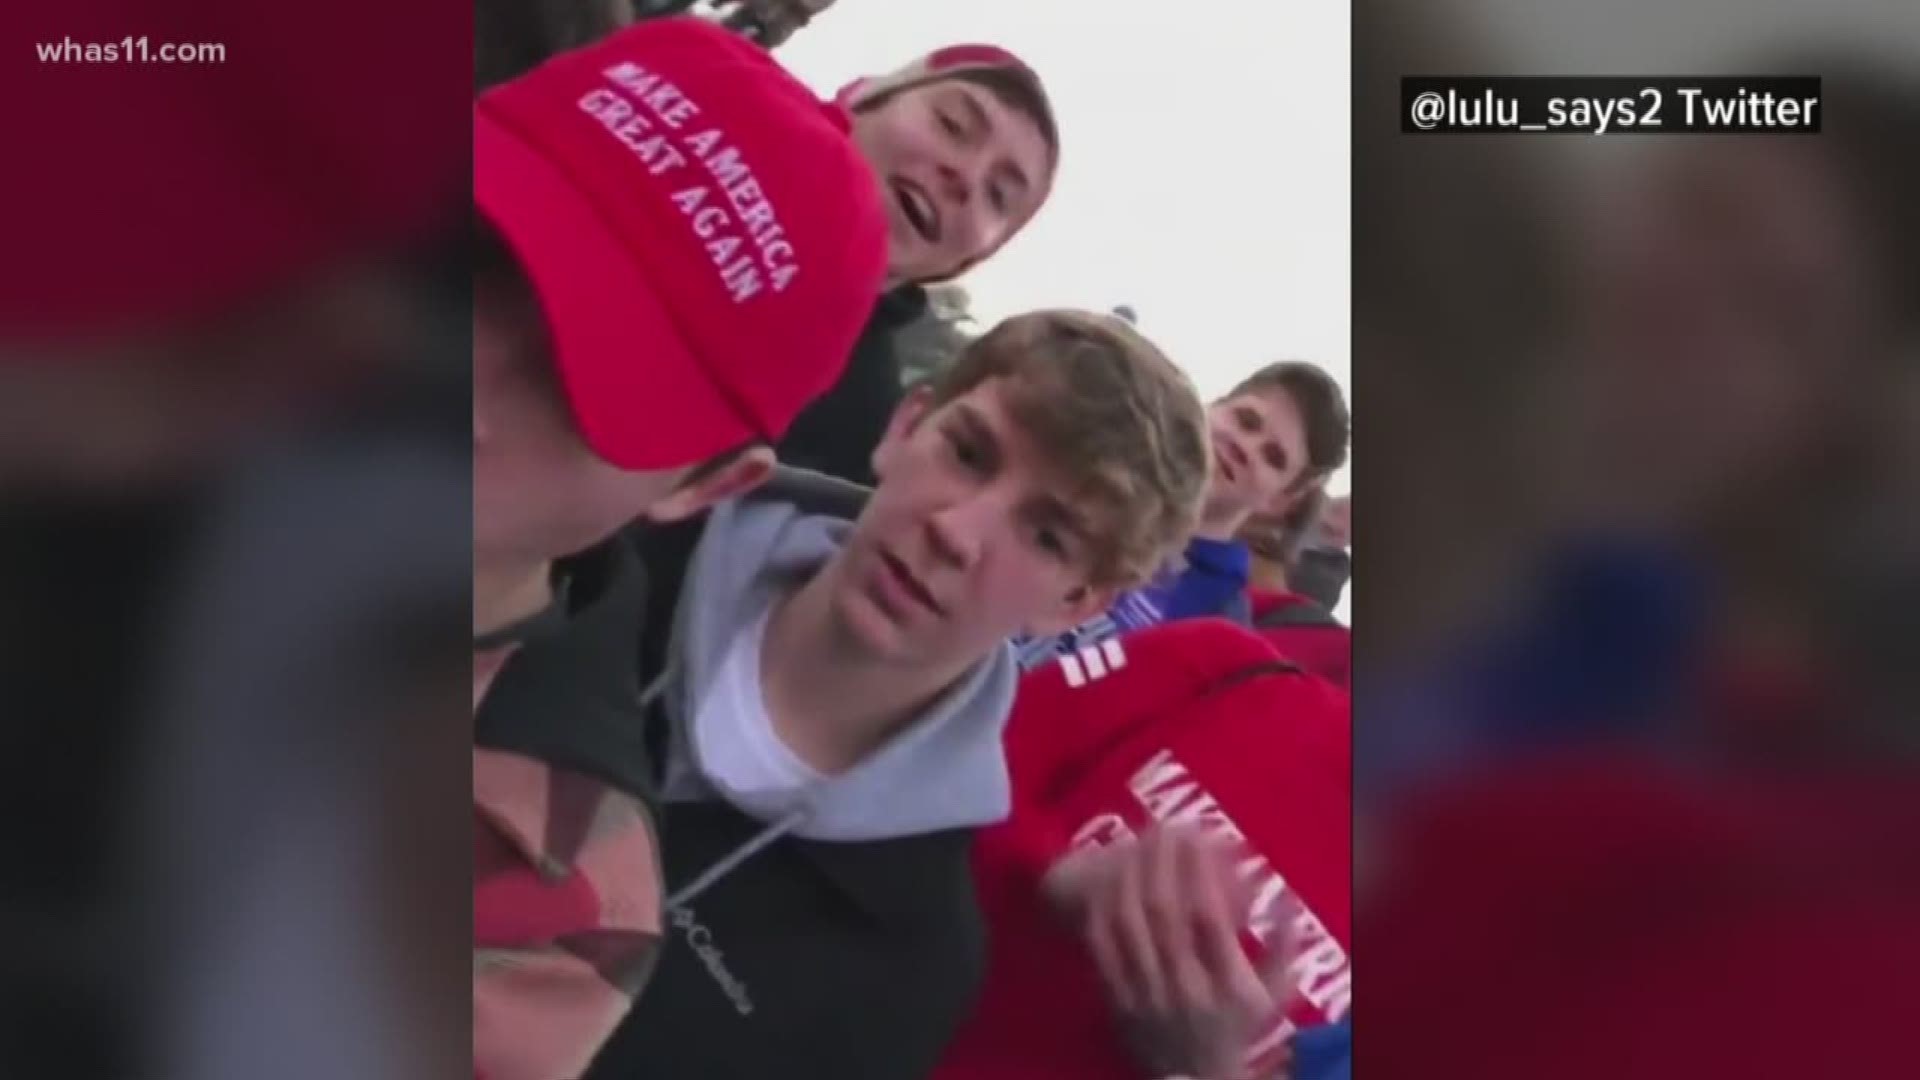 Nick Sandmann, a junior at Covington Catholic High School, shared his side of a video that went viral over the weekend.